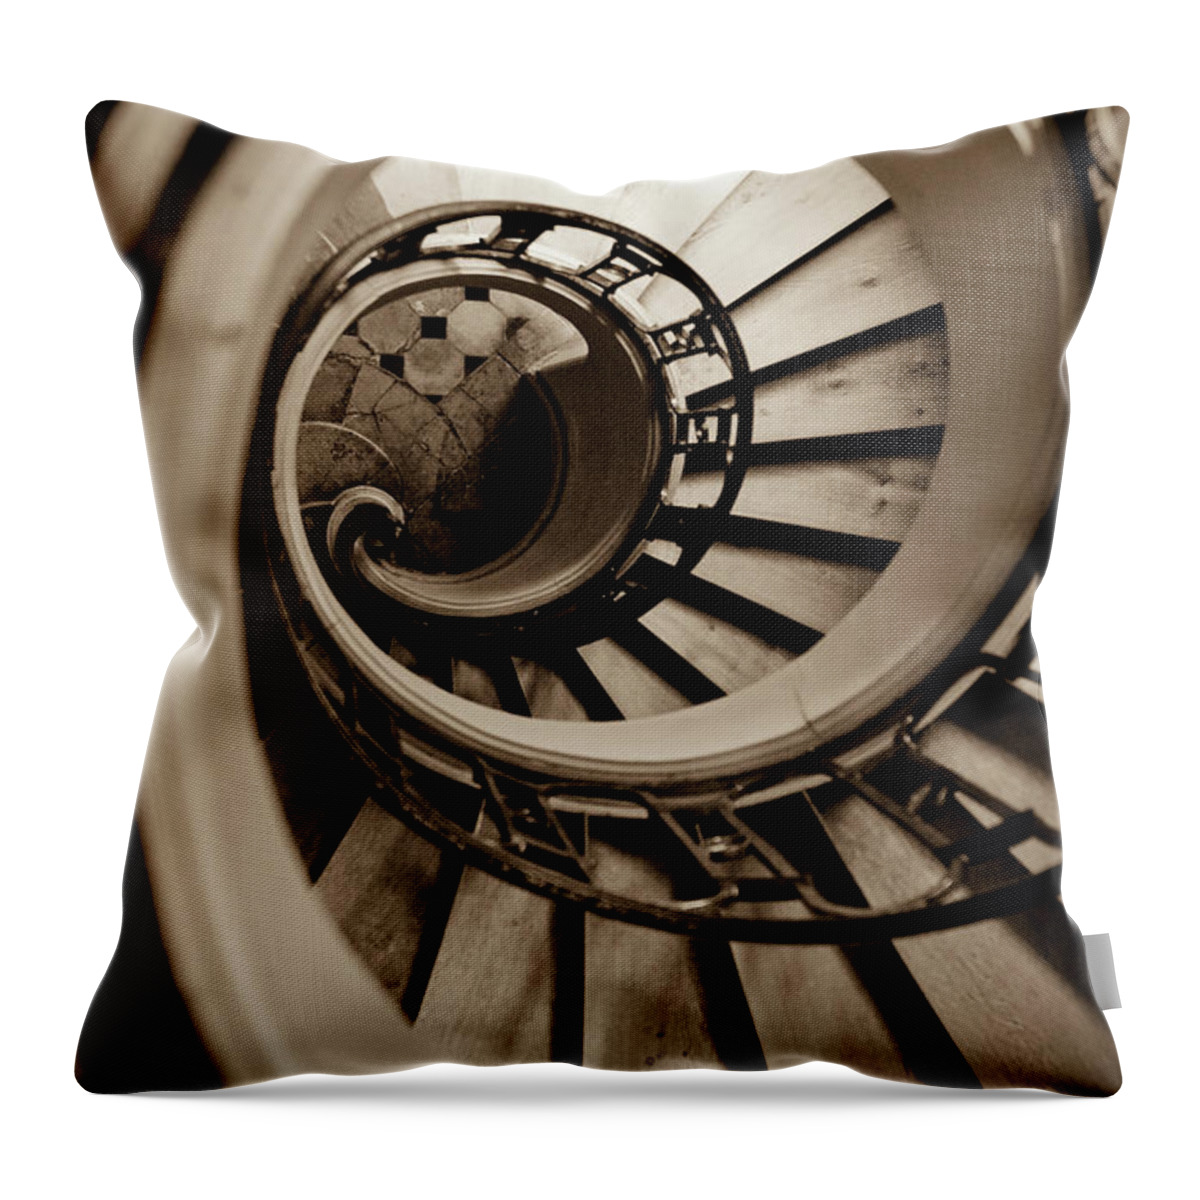 B&w Throw Pillow featuring the photograph Spiral Staircase by Sebastian Musial